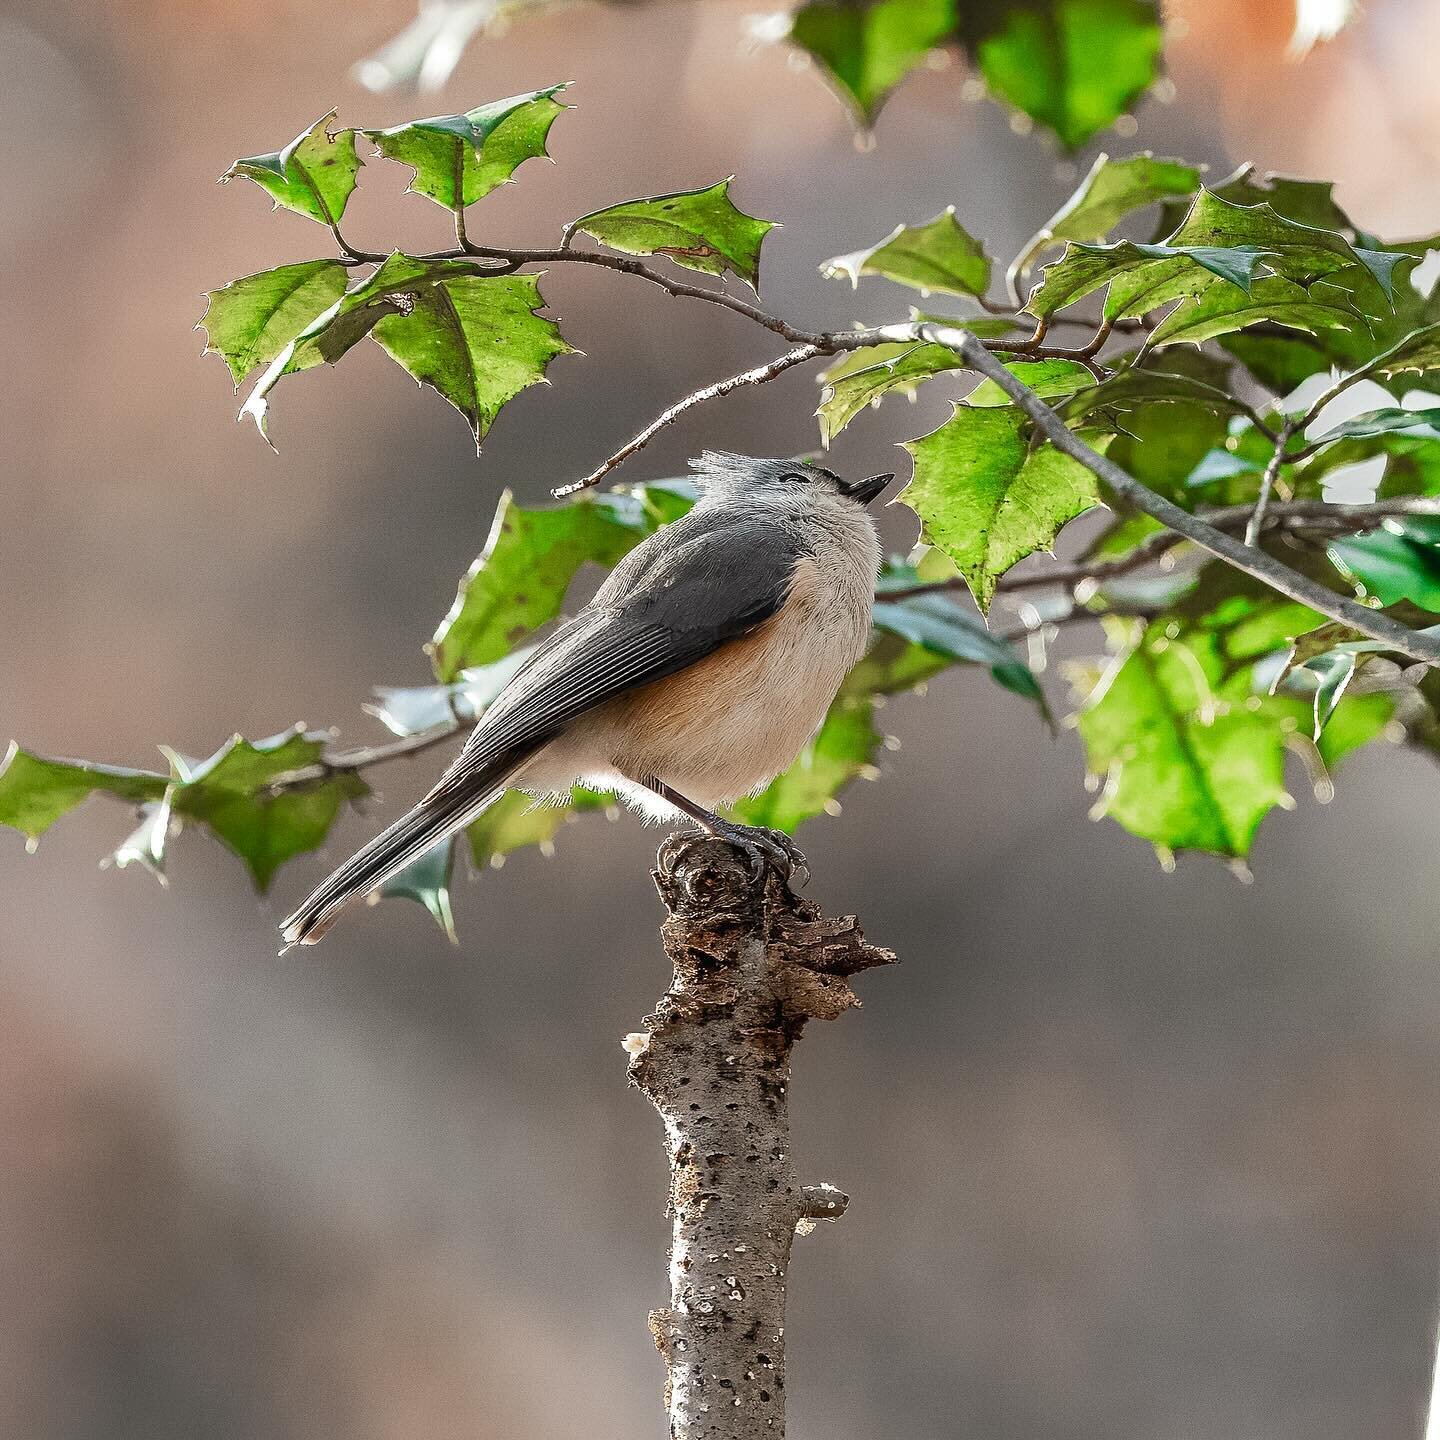 Winter colors of a tufted titmouse.